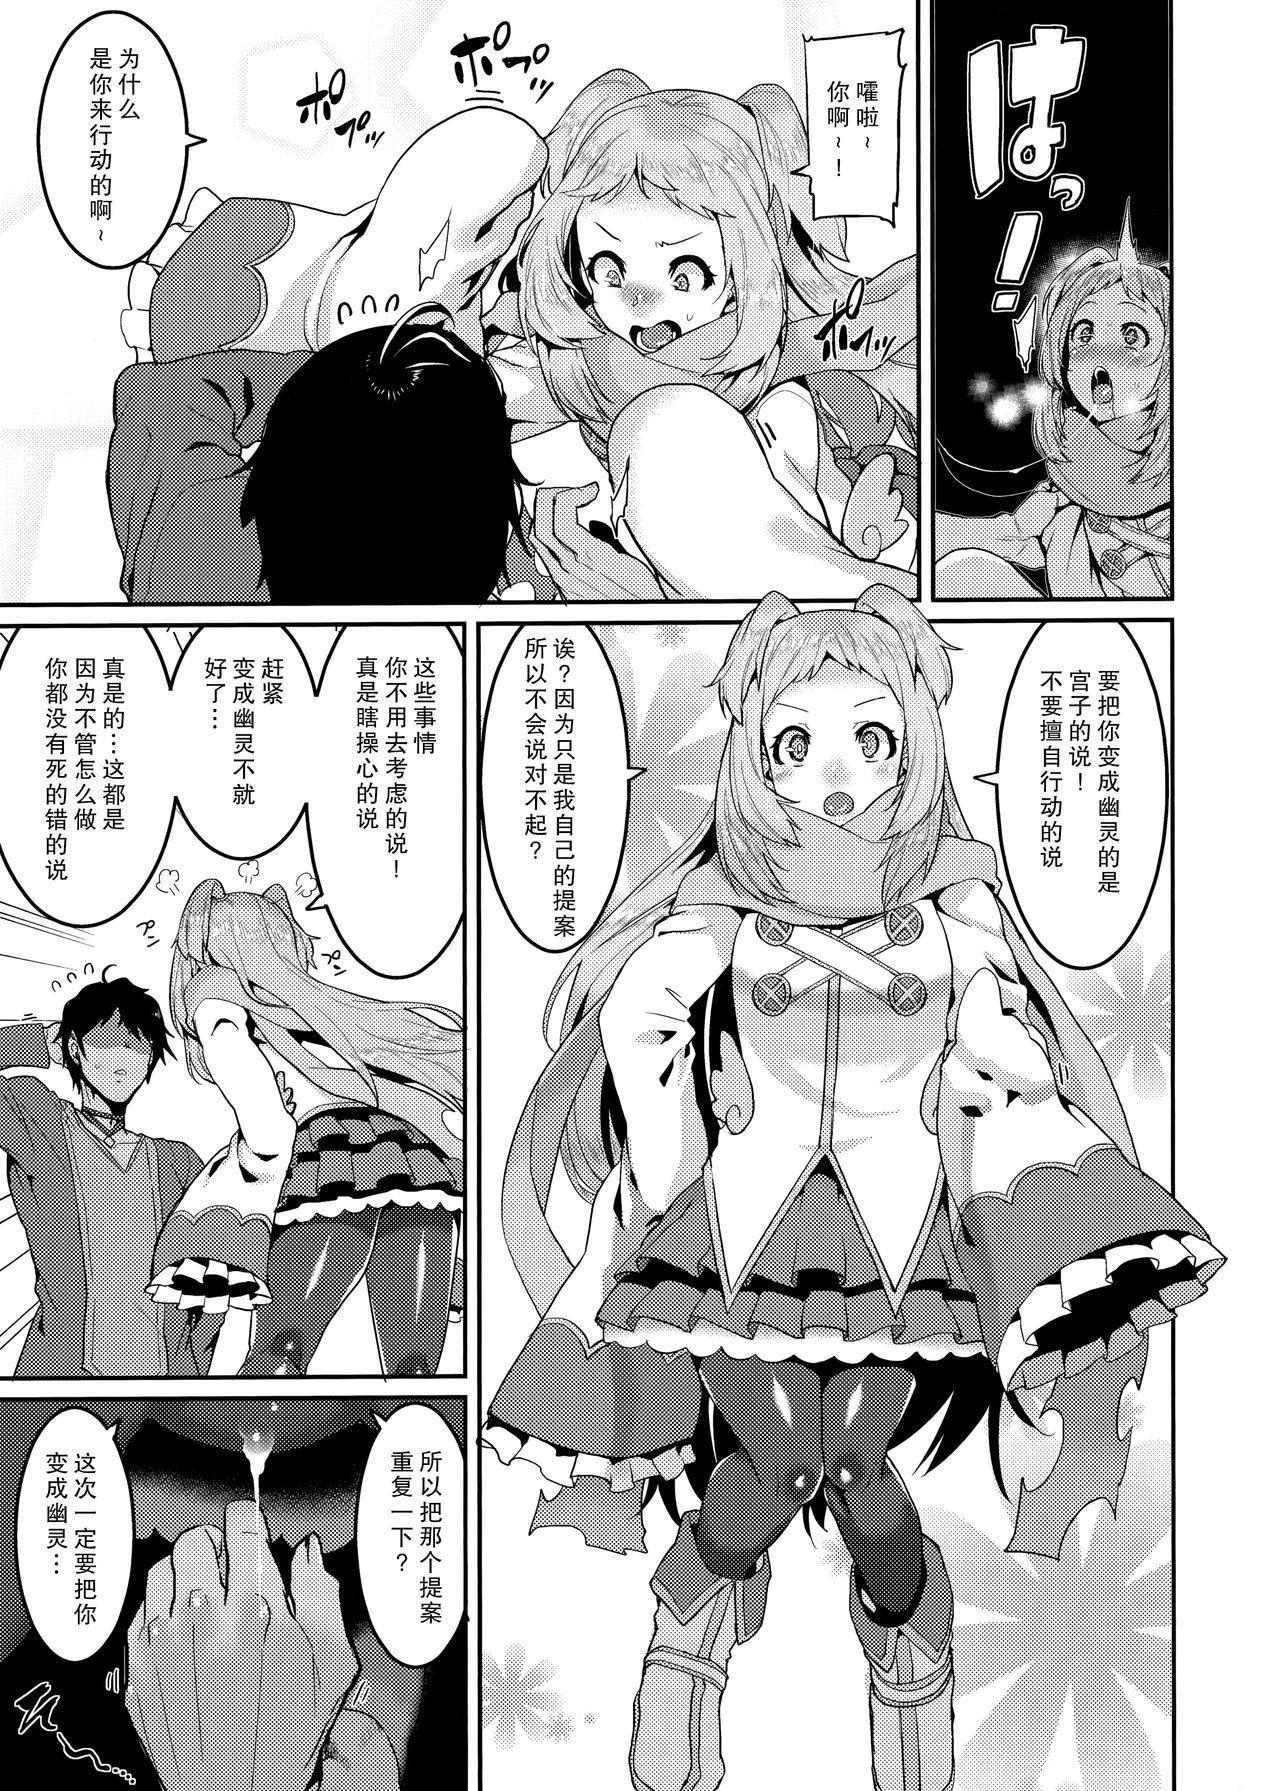 Gay Cumjerkingoff (C96) [HBO (Henkuma)] Pudding Switch (Princess Connect! Re:Dive) [Chinese] 【零食汉化组】 - Princess connect Gay Clinic - Page 8